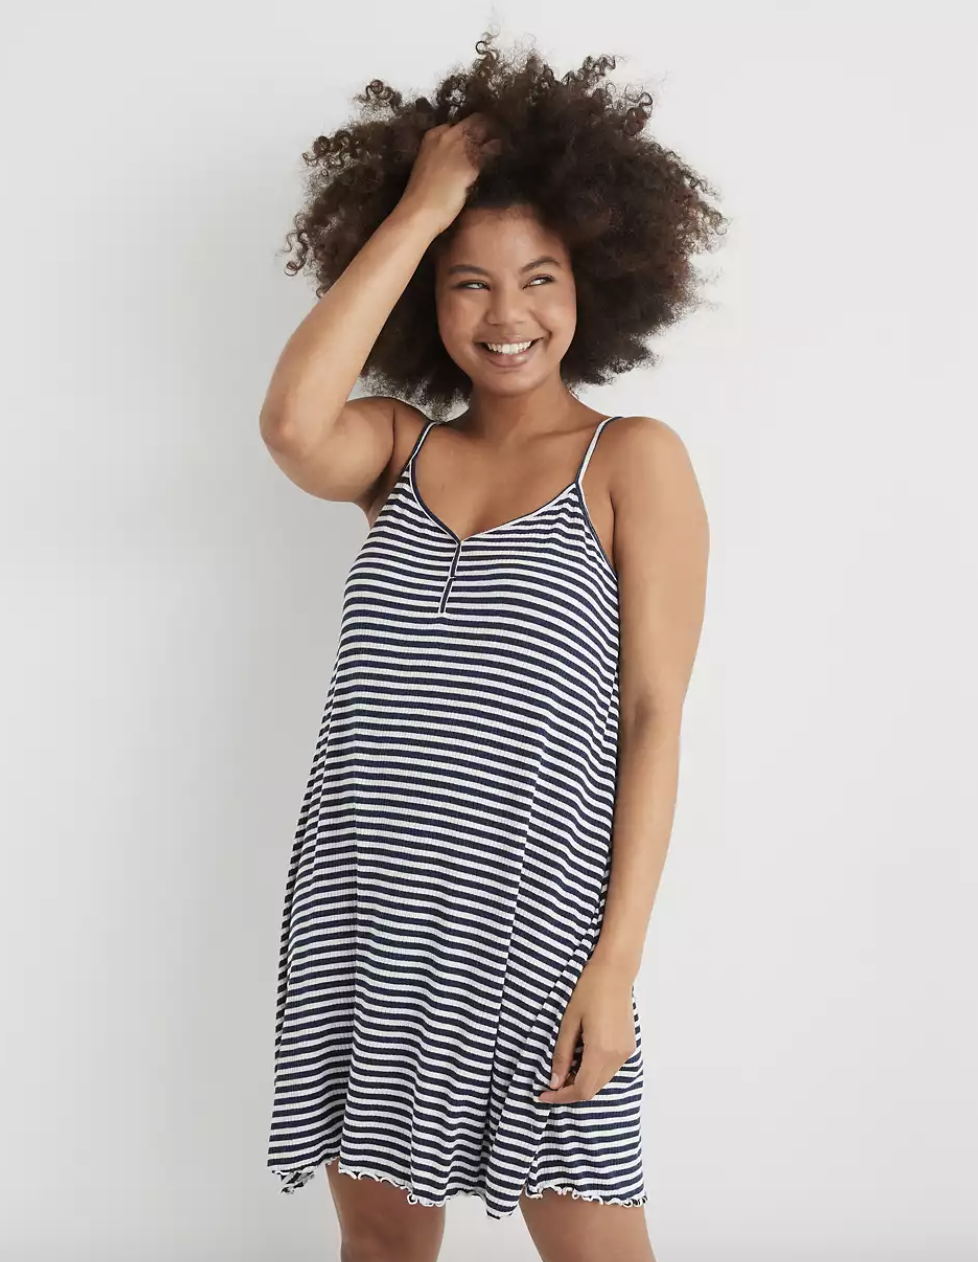 model wearing the black and white striped nightie 